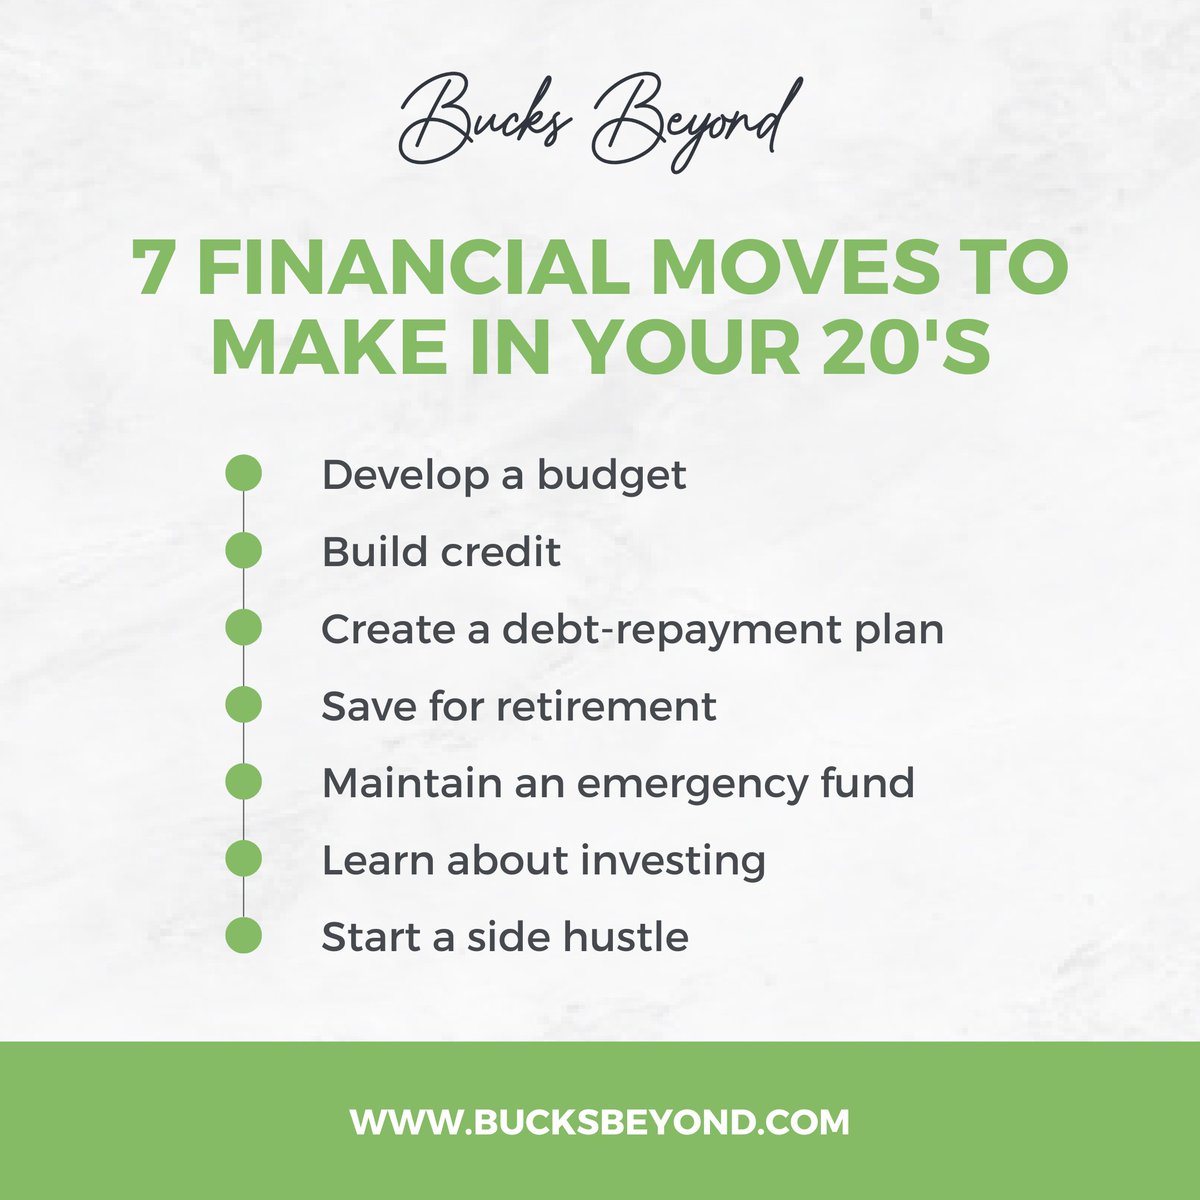 Optimize your financial journey in your 20s with these 7 tips to ensure a prosperous future, and remember, focus on what you can achieve along your own path.

#finance #budgeting #savingmoney #wealthbuilding #finanicalgoals #sidehustles #budgettips #budget #investing #money